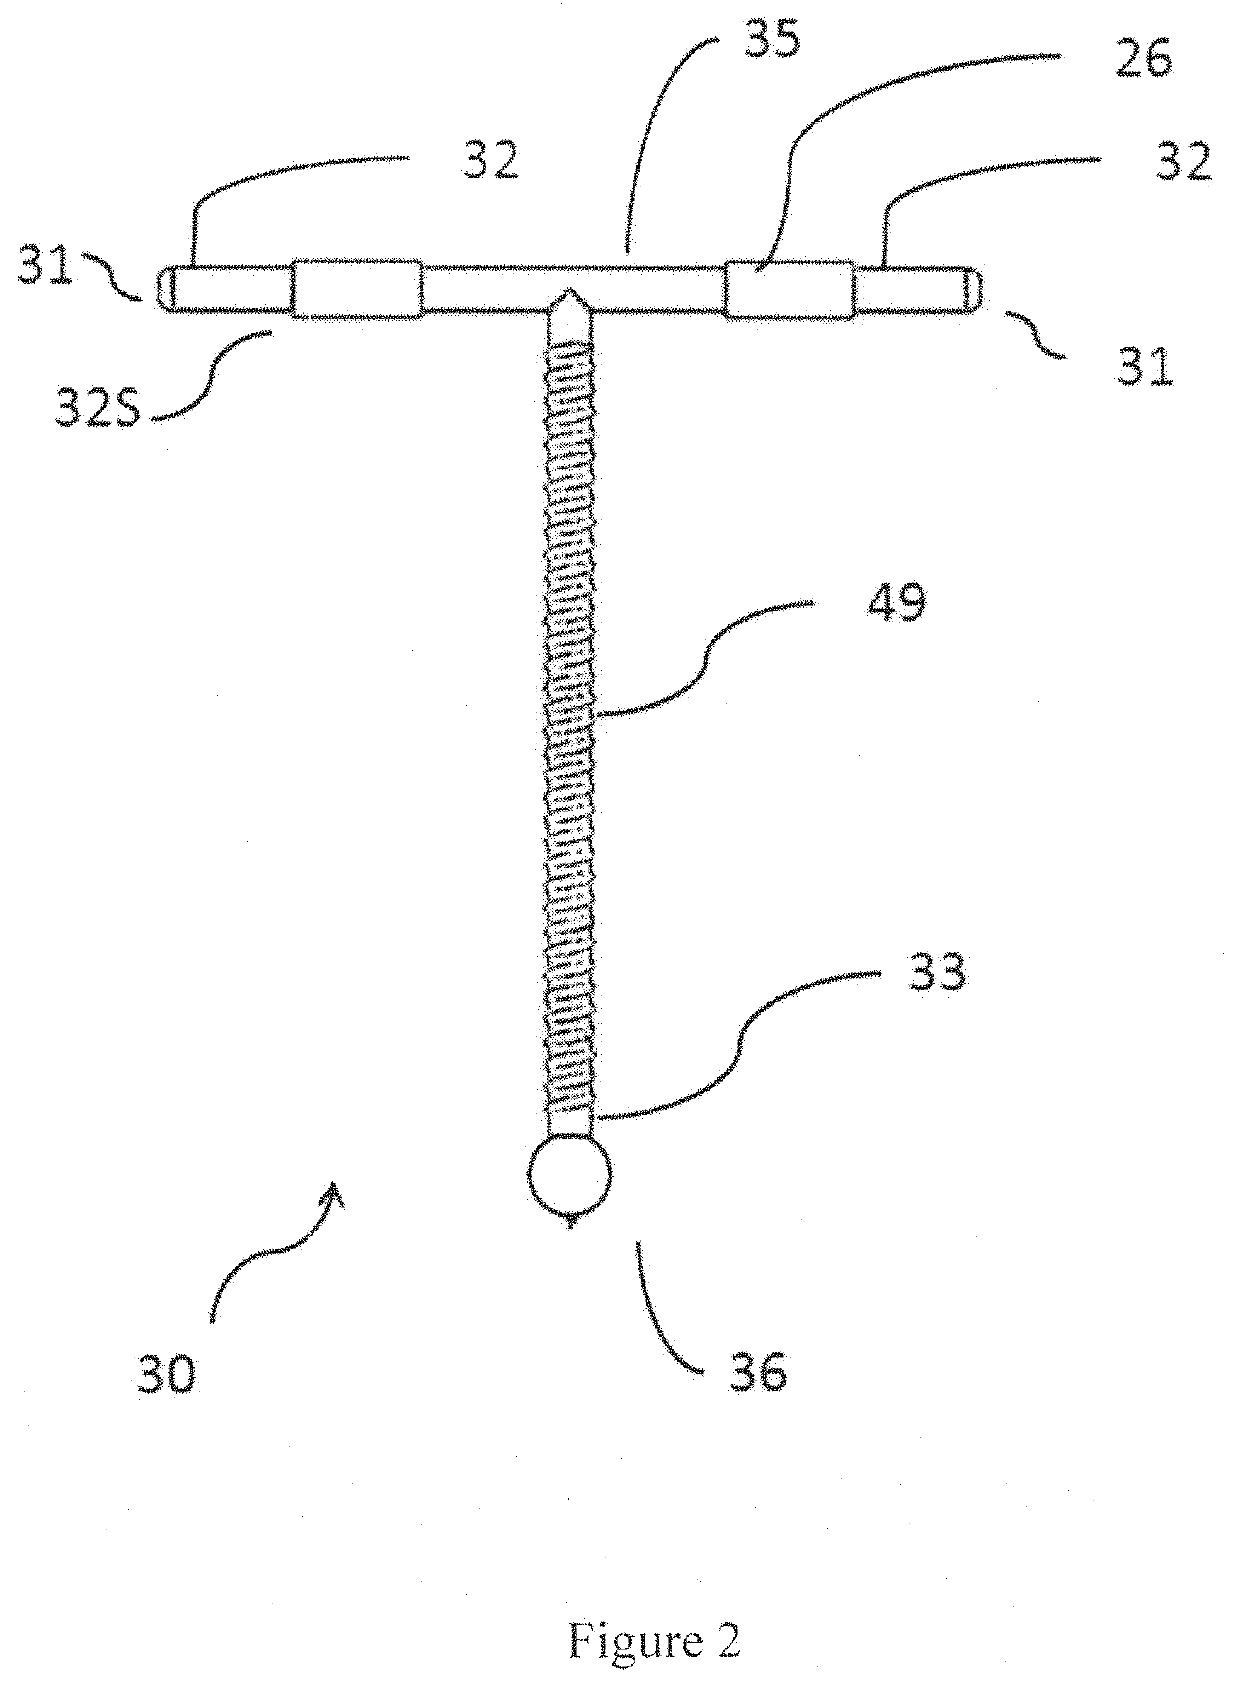 Instrument to prepare an intra-uterine device for insertion